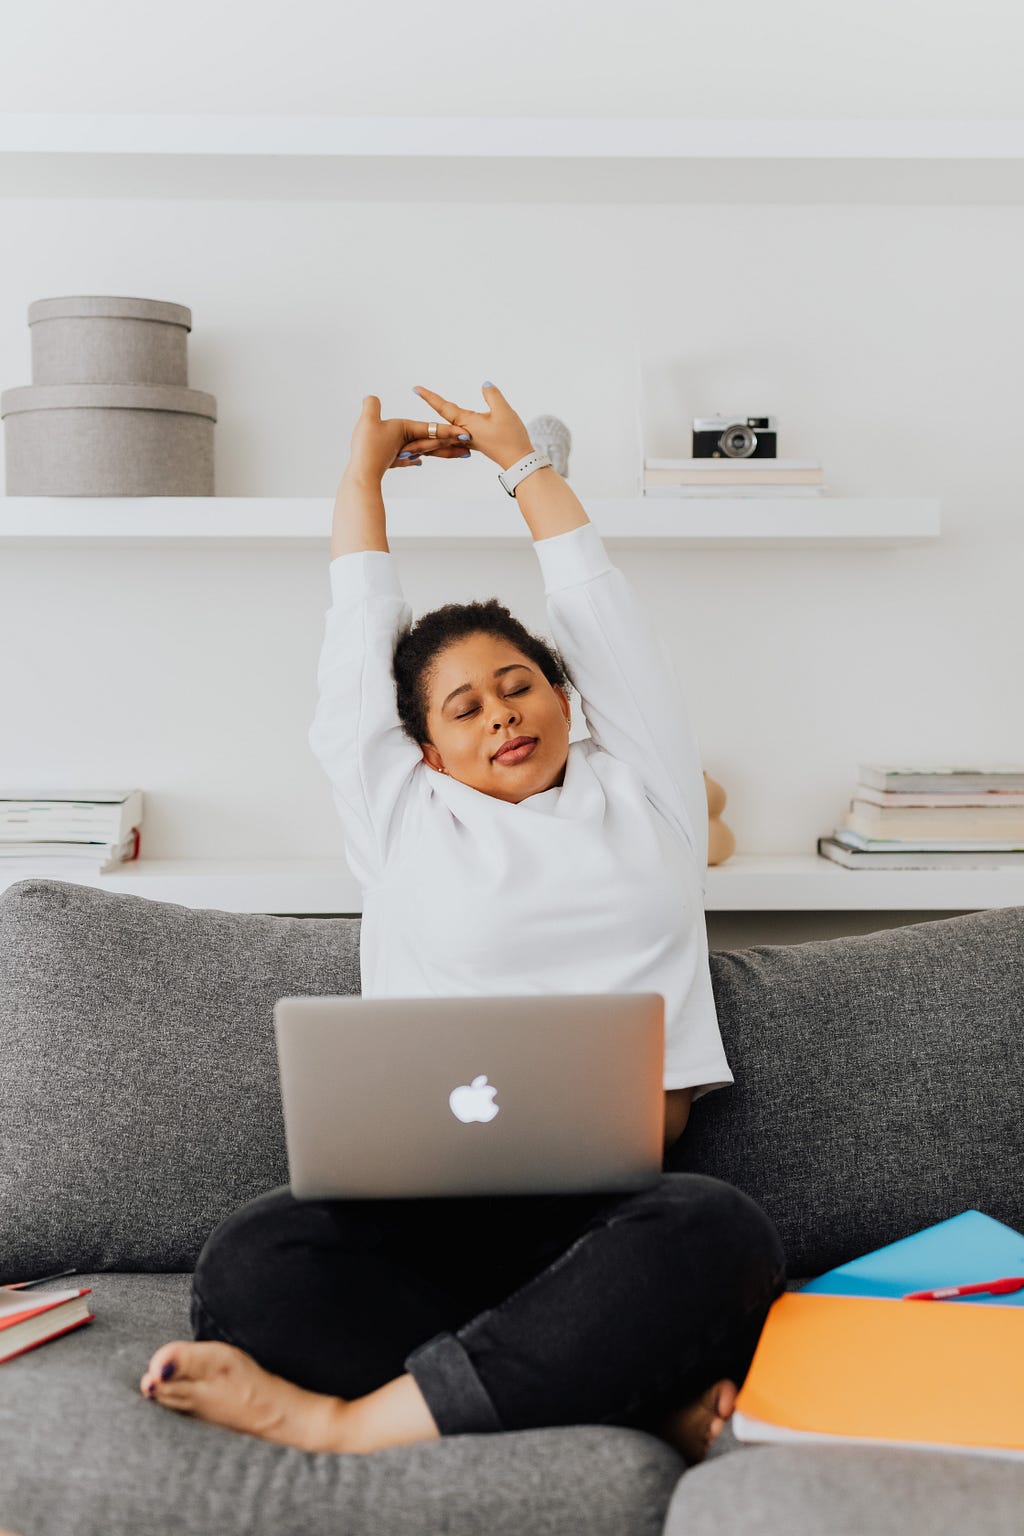 Woman stretching her arms on a couch with a laptop in her lap